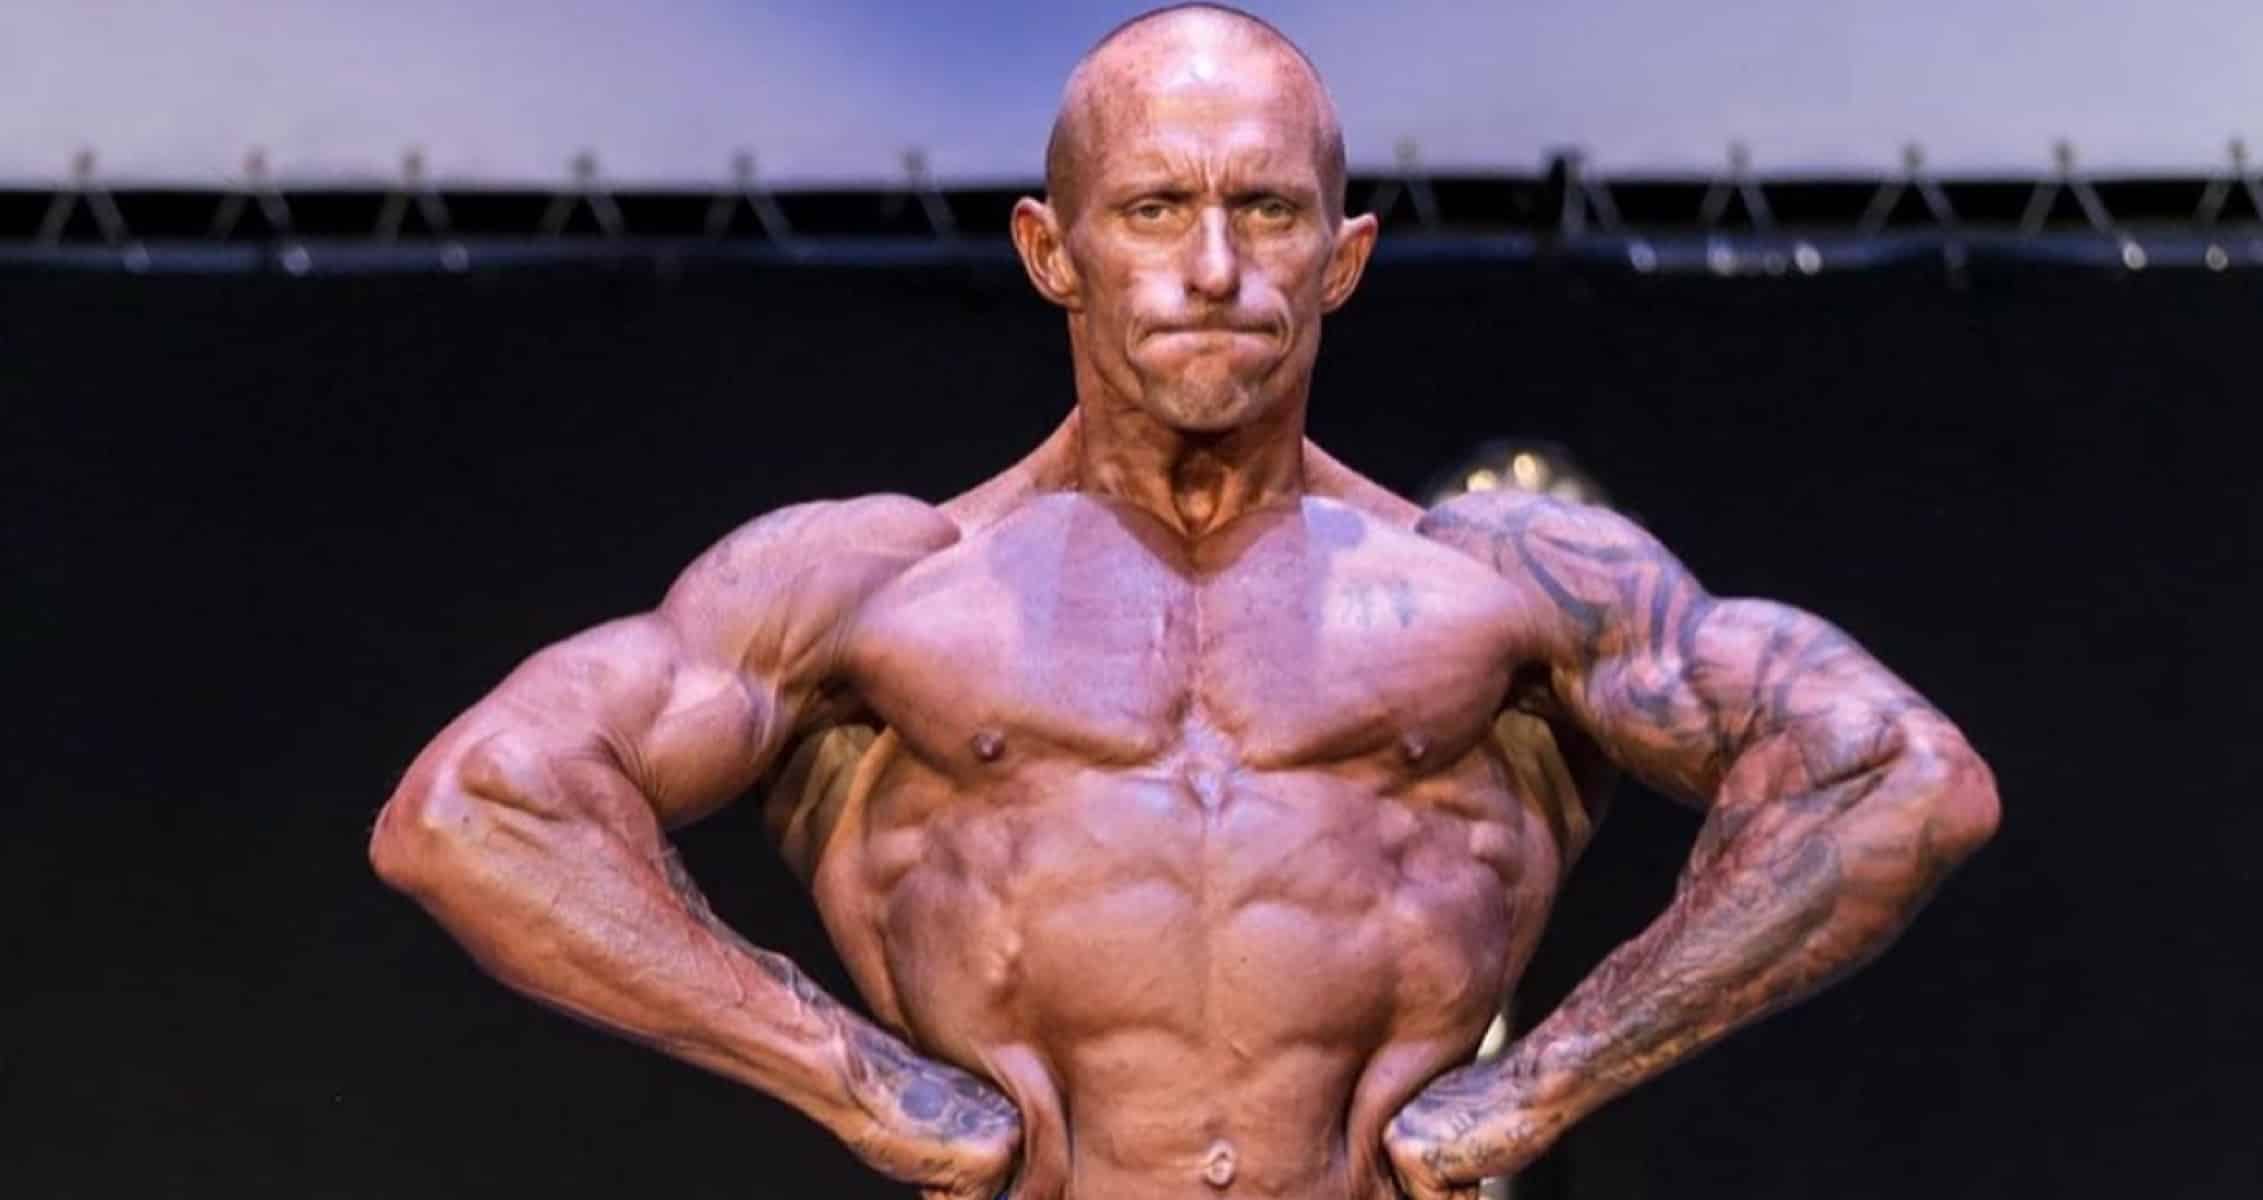 Natural Bodybuilder Michael Boyle Teaches How to Make Muscle Growth